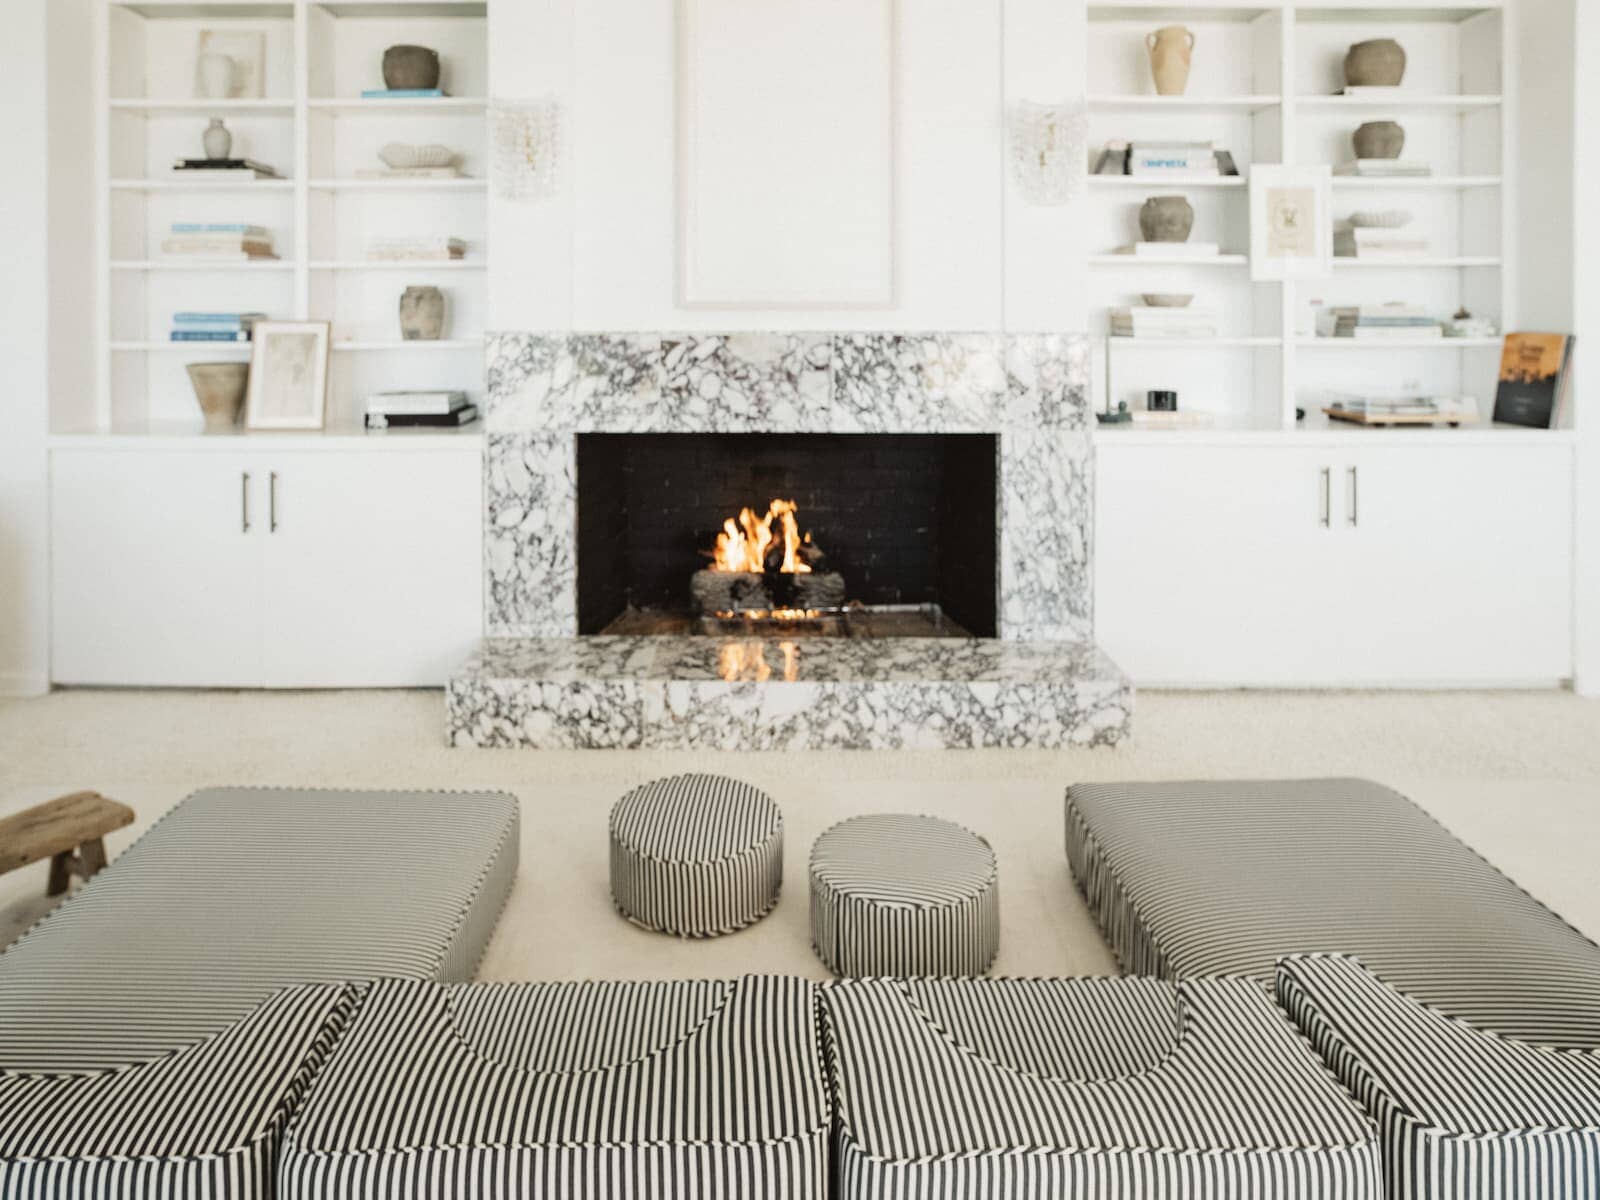 pillow stack arranged around fireplace in living room